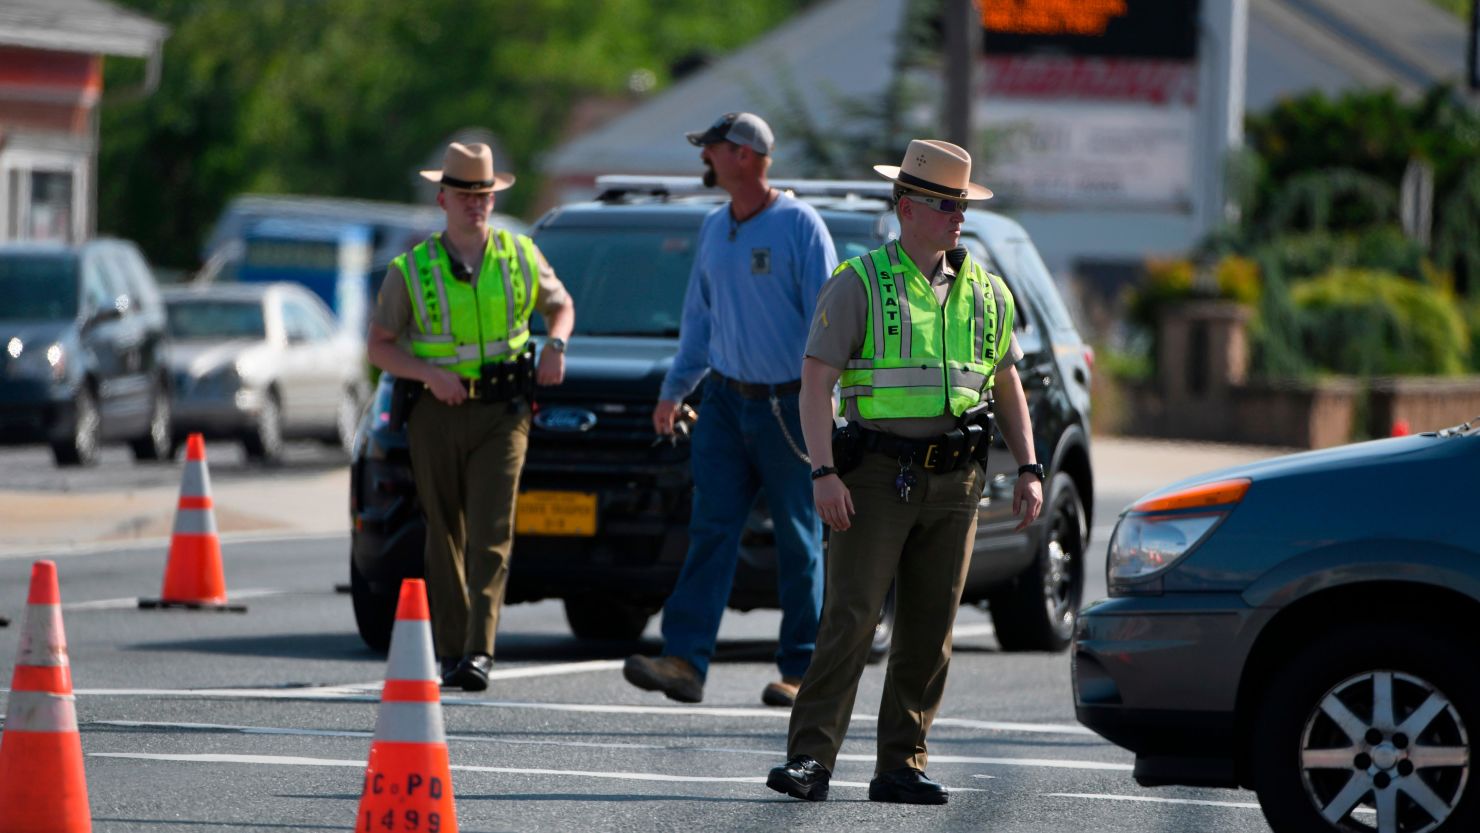 Maryland State Police divert traffic in Perry Hall, just outside Baltimore.